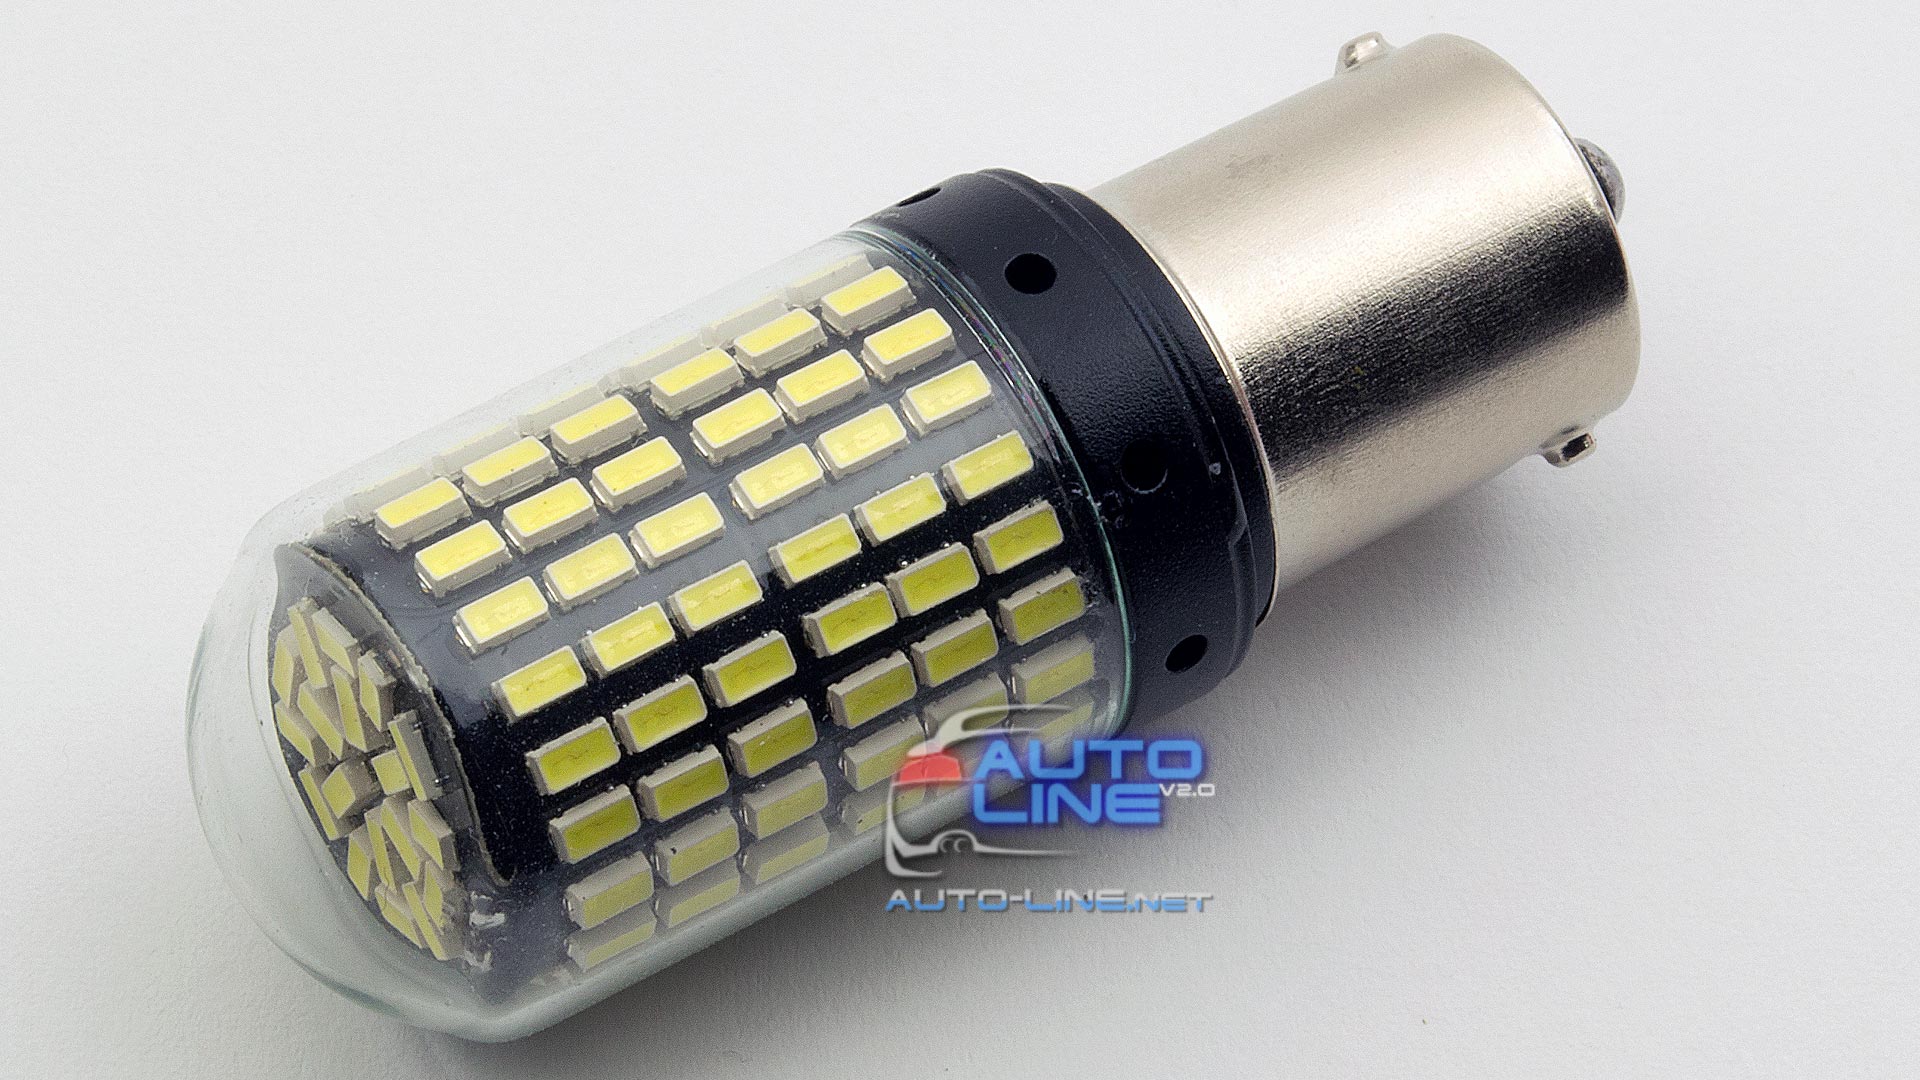 Cyclone S25-064 CAN 3014-144 12-24V